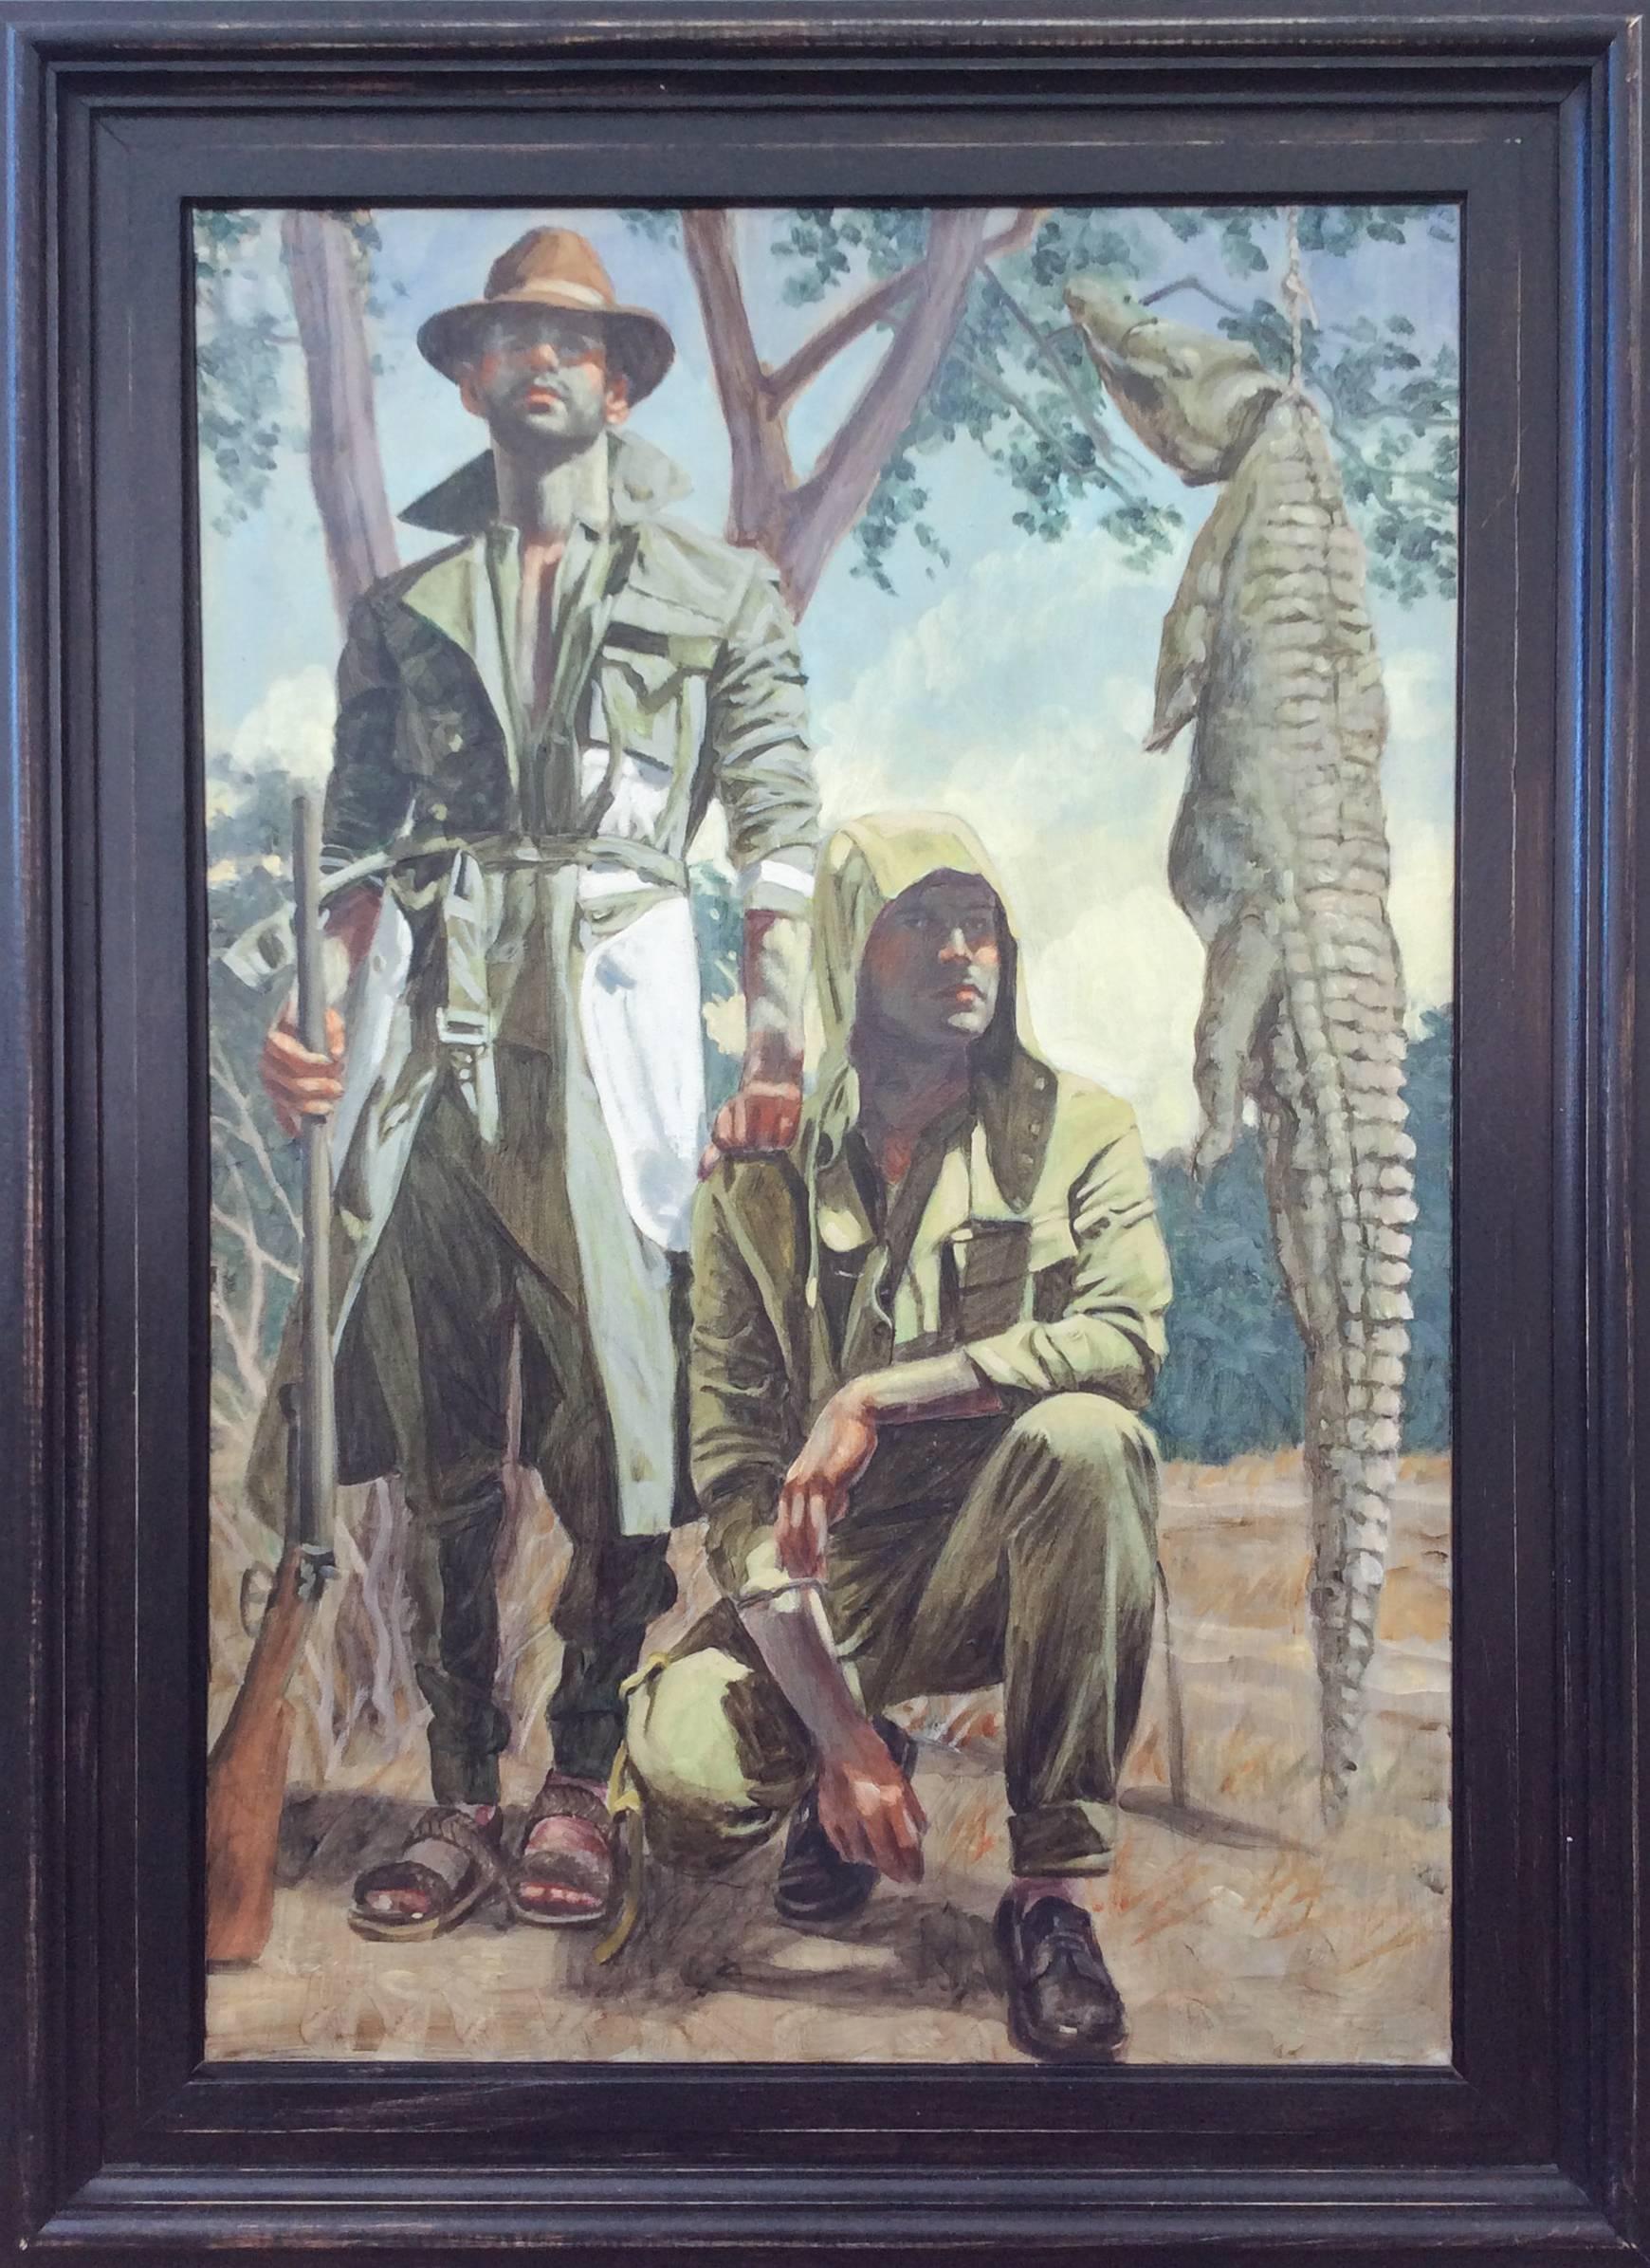 Mark Beard Figurative Painting - Two Men with Crocodile (Oil Painting of Standing Male Figures on Safari